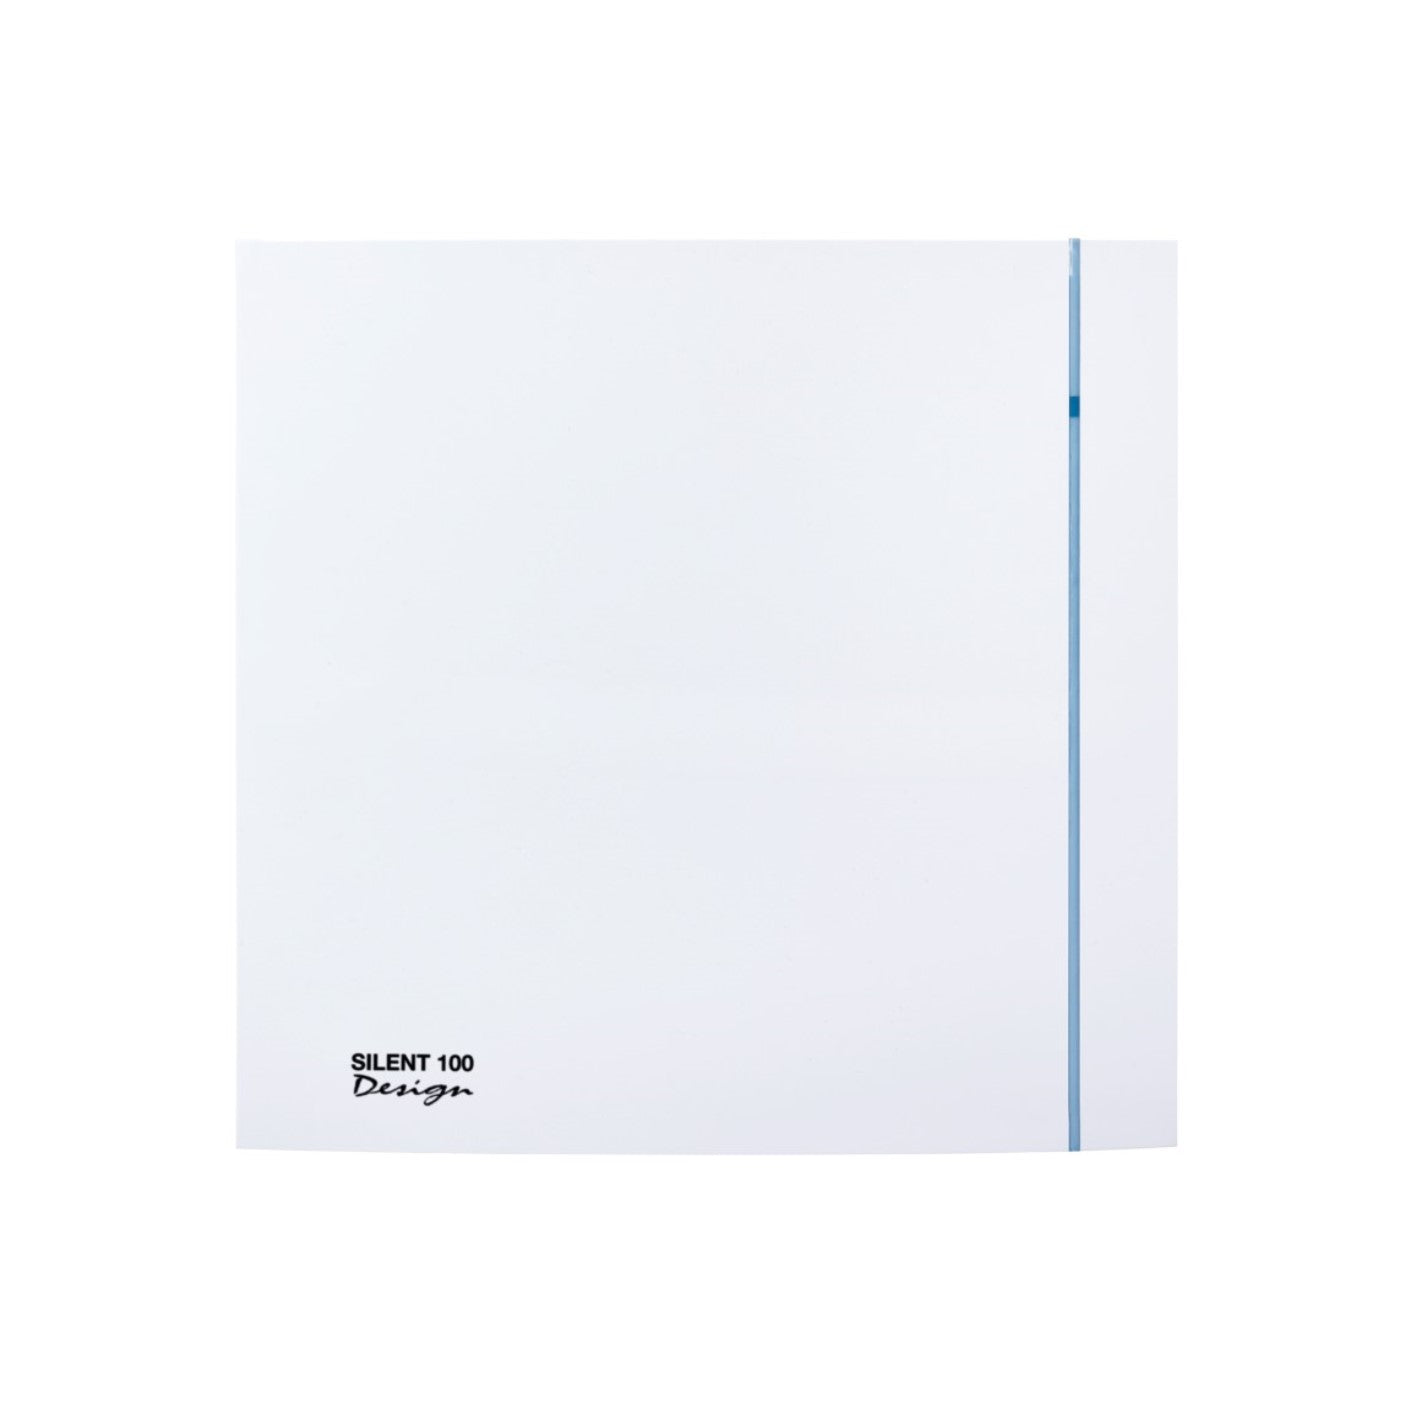 An image of an envirovent white extractor fan on a white background